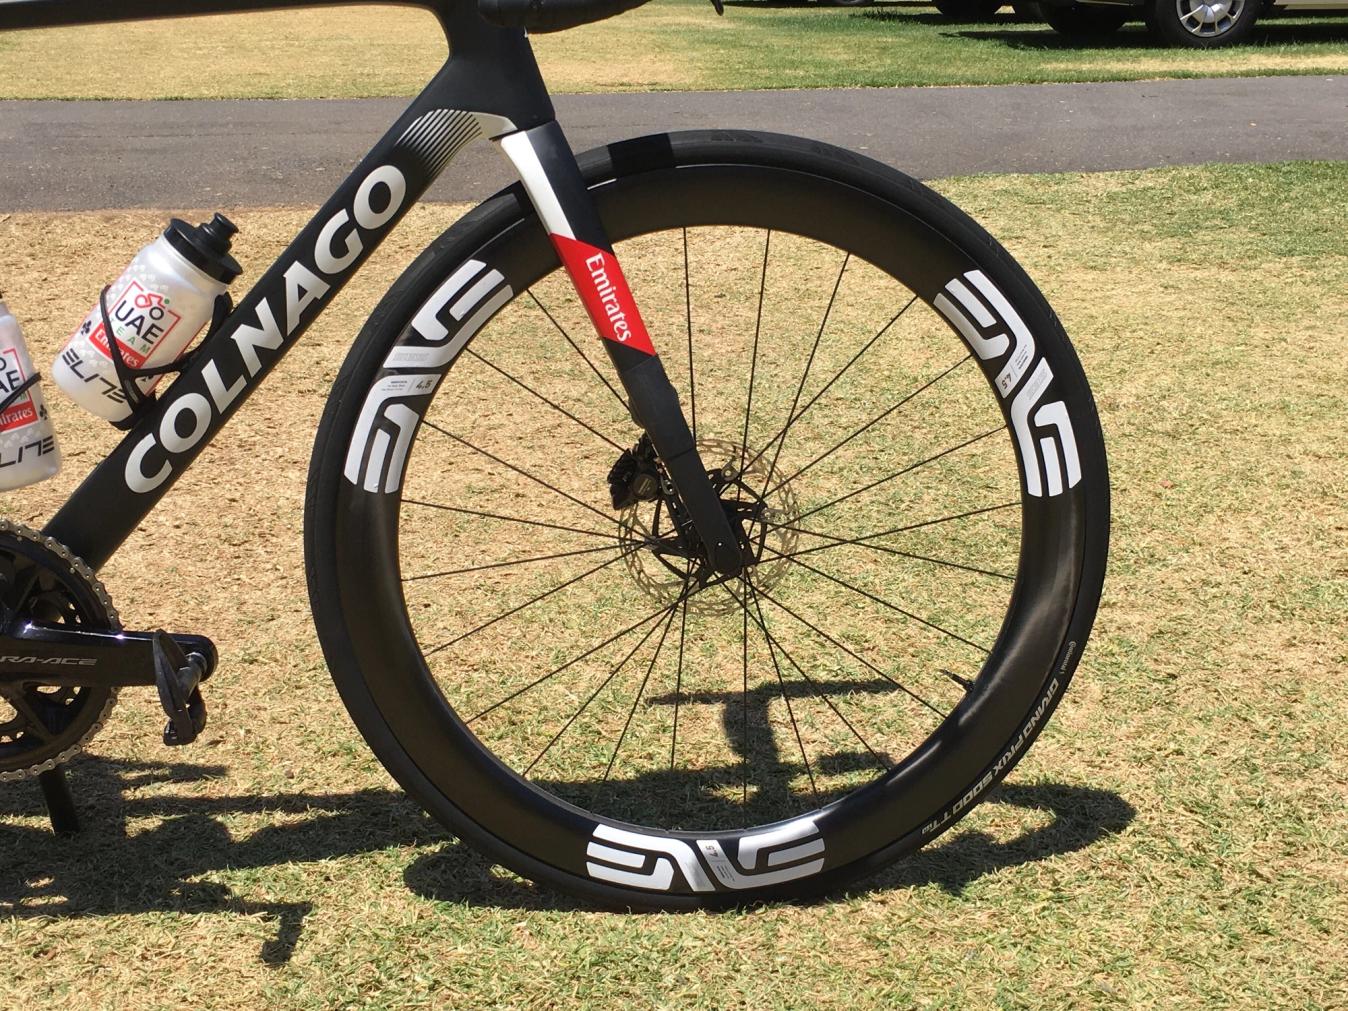 Hidden within the ENVE SES 4.5 wheels are new hubs